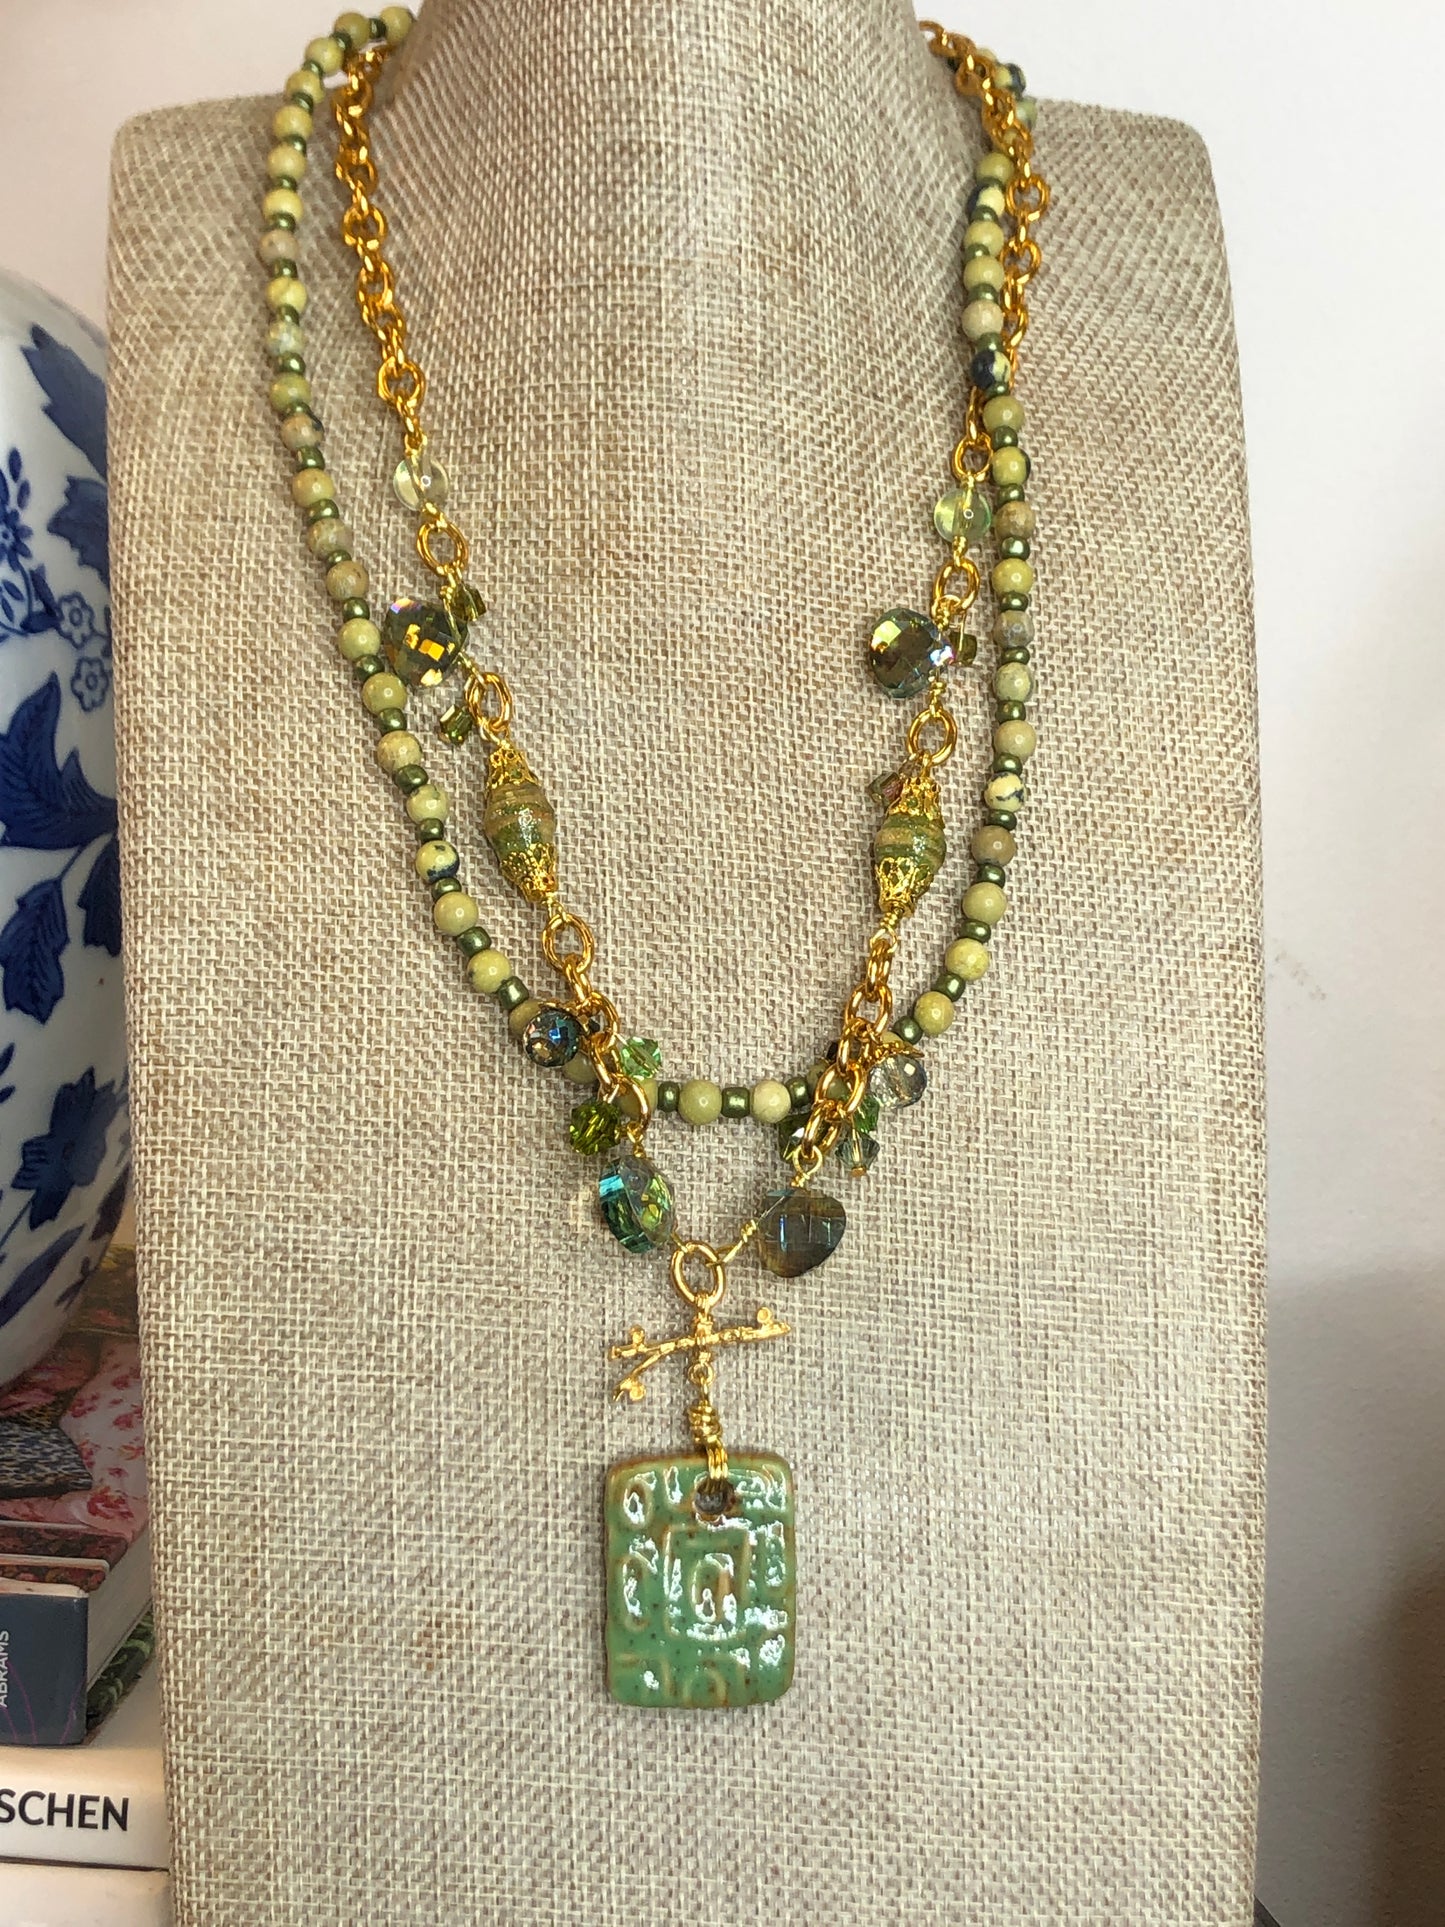 Meet Geo, Double Strand Necklace with Jasper Gemstones, Crystals, Fabric and Glass beads